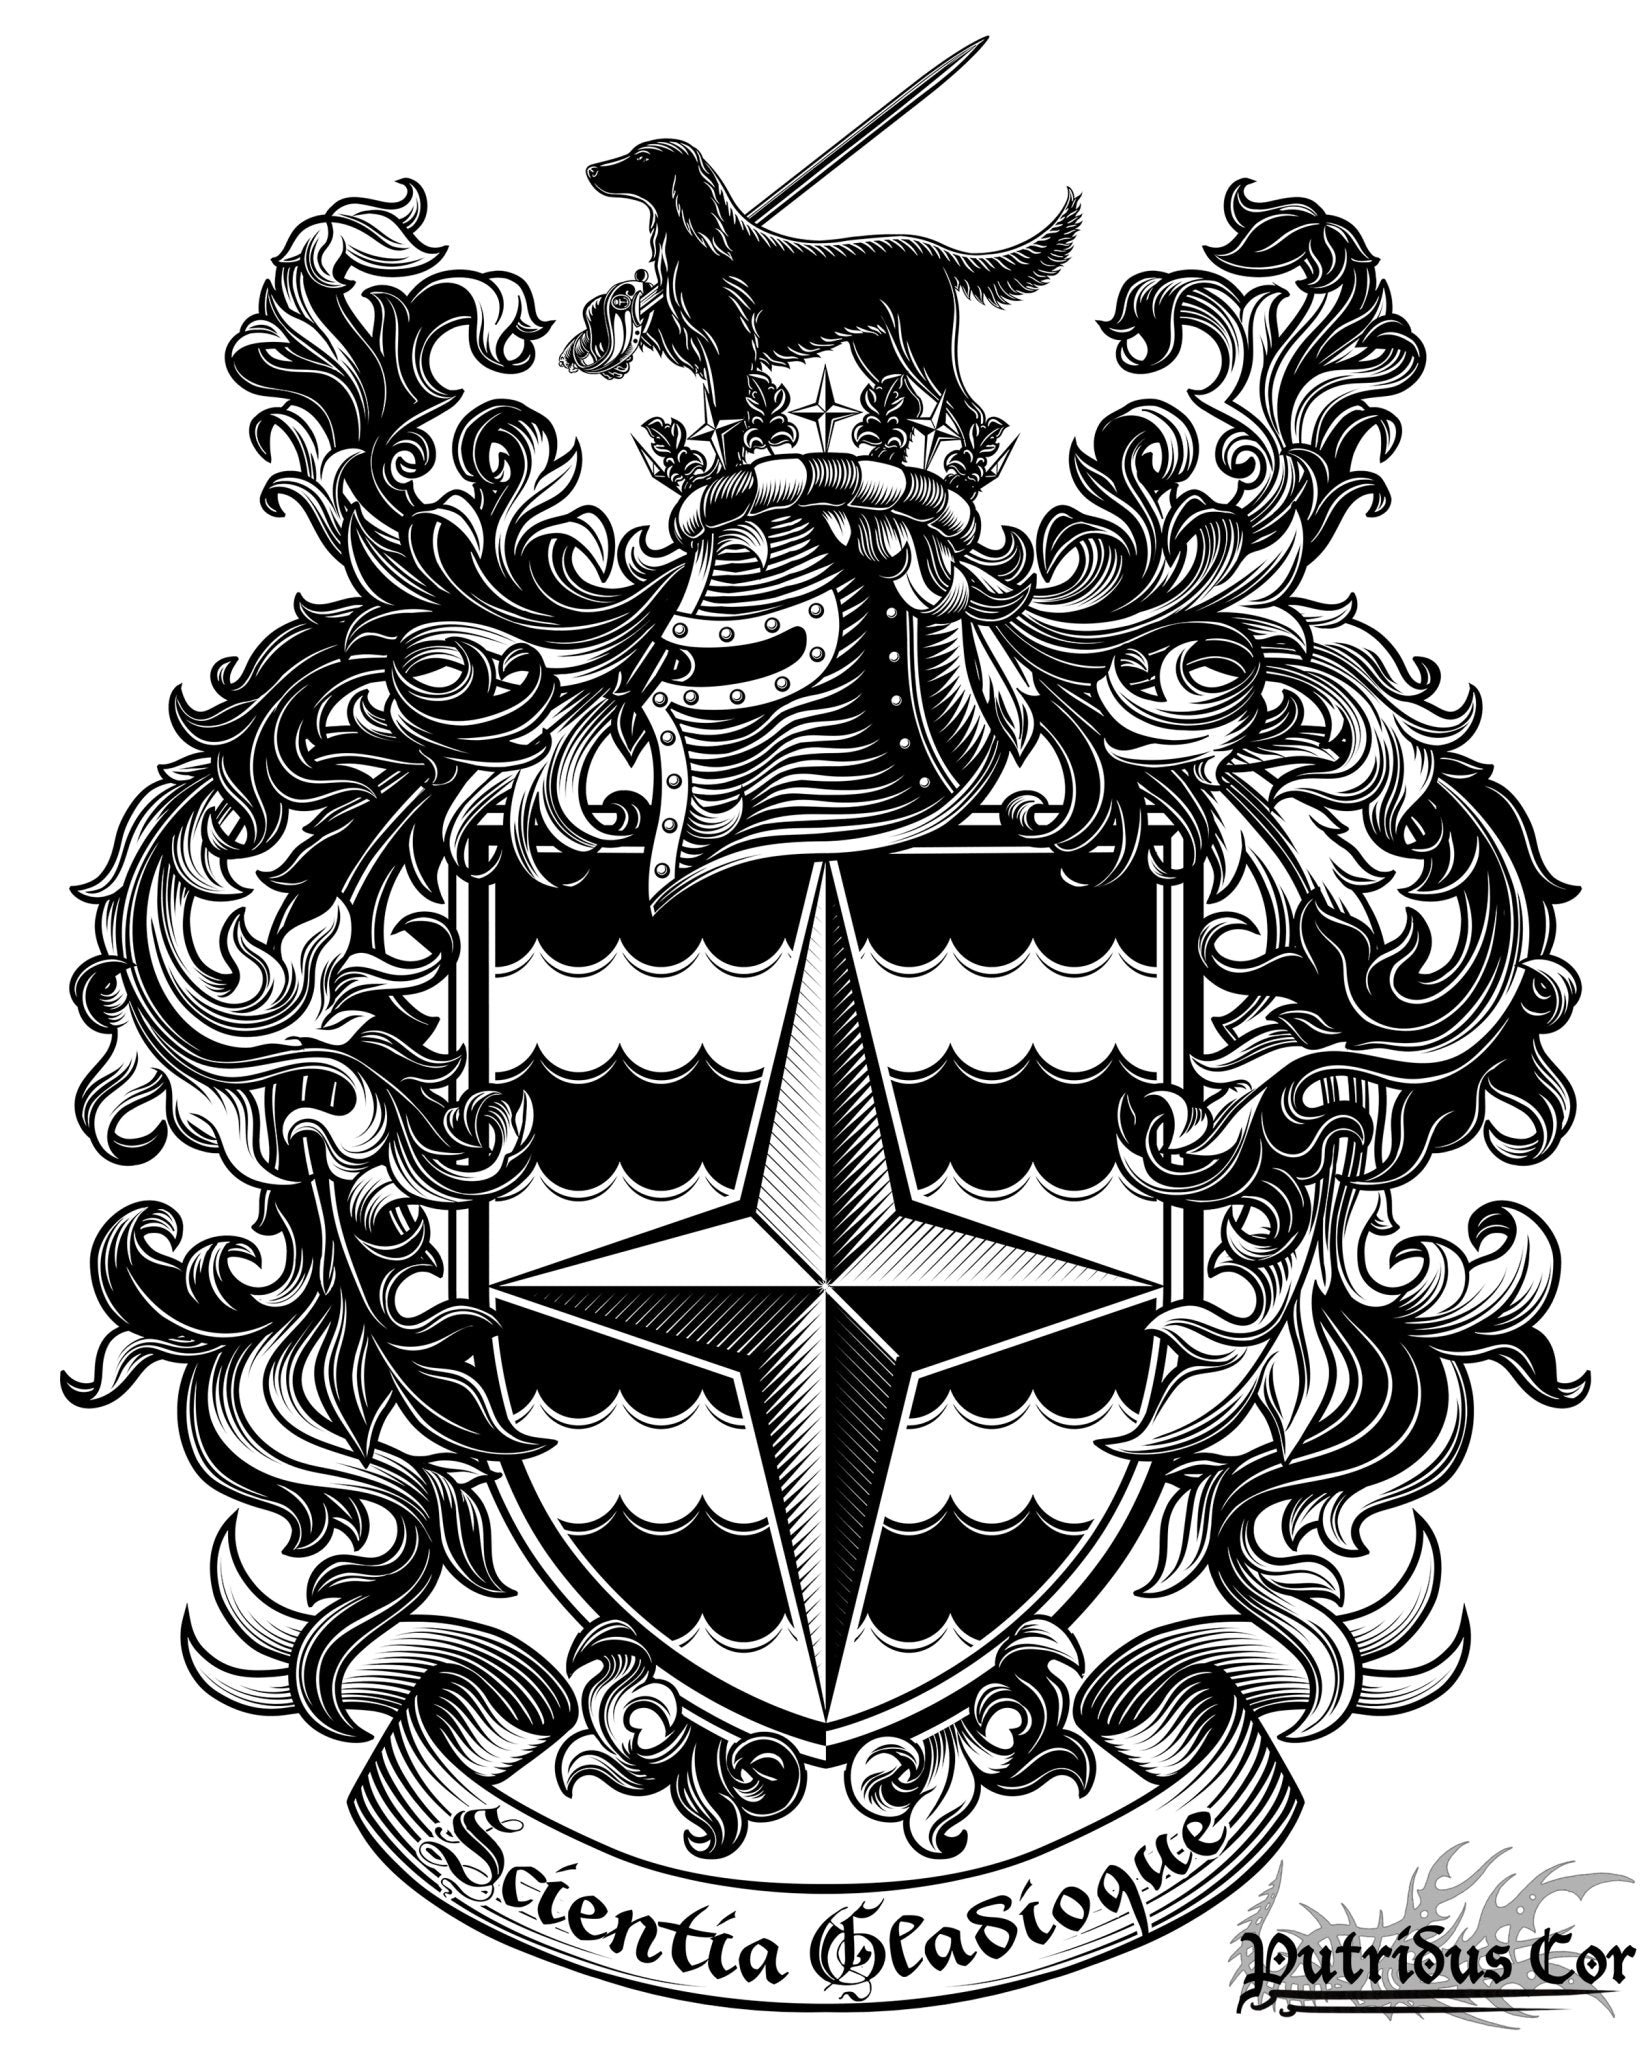 Black and White Etching Family Crest, Vector Trace, Custom Coat of Arms Design and Emblem Logos, Personalized Heraldry Art